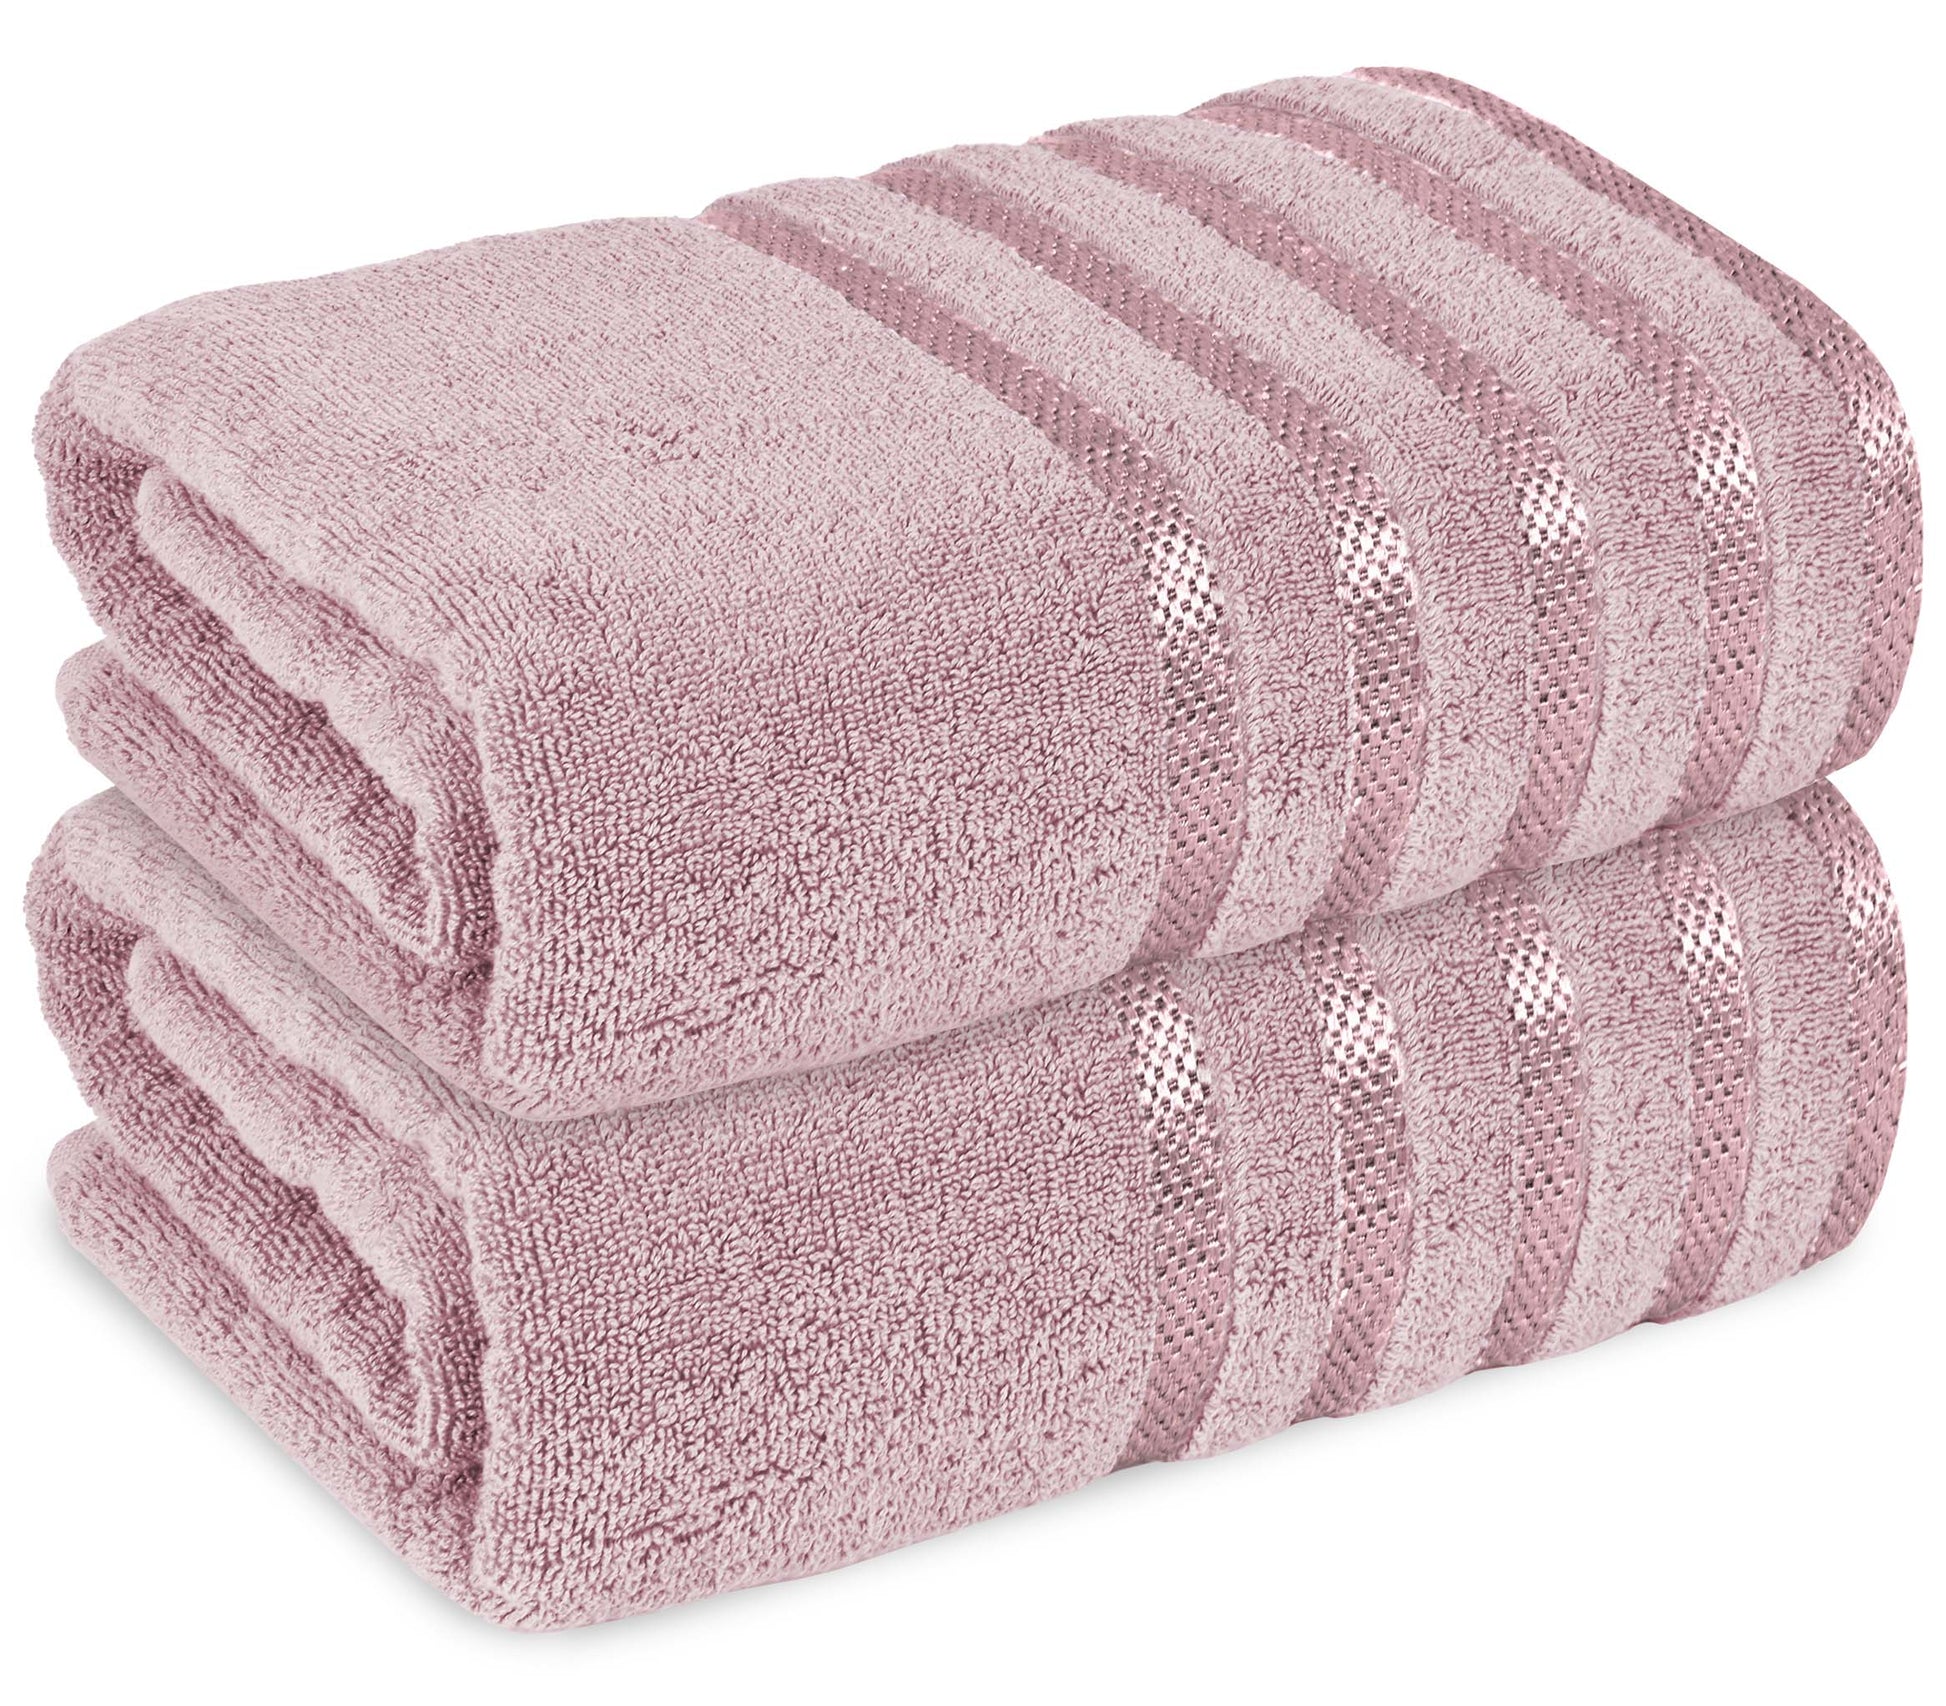 2 Pc ultrasoft and quick dry viscose bath sheet set | Eco-friendly and skin-friendly made of 100% Cotton | 2 bath sheets 90x180cm / 35x70inch-Towel Set-Weave Essentials-2x Jumbo Bath Sheet-Blush Pink-Weave Essentials